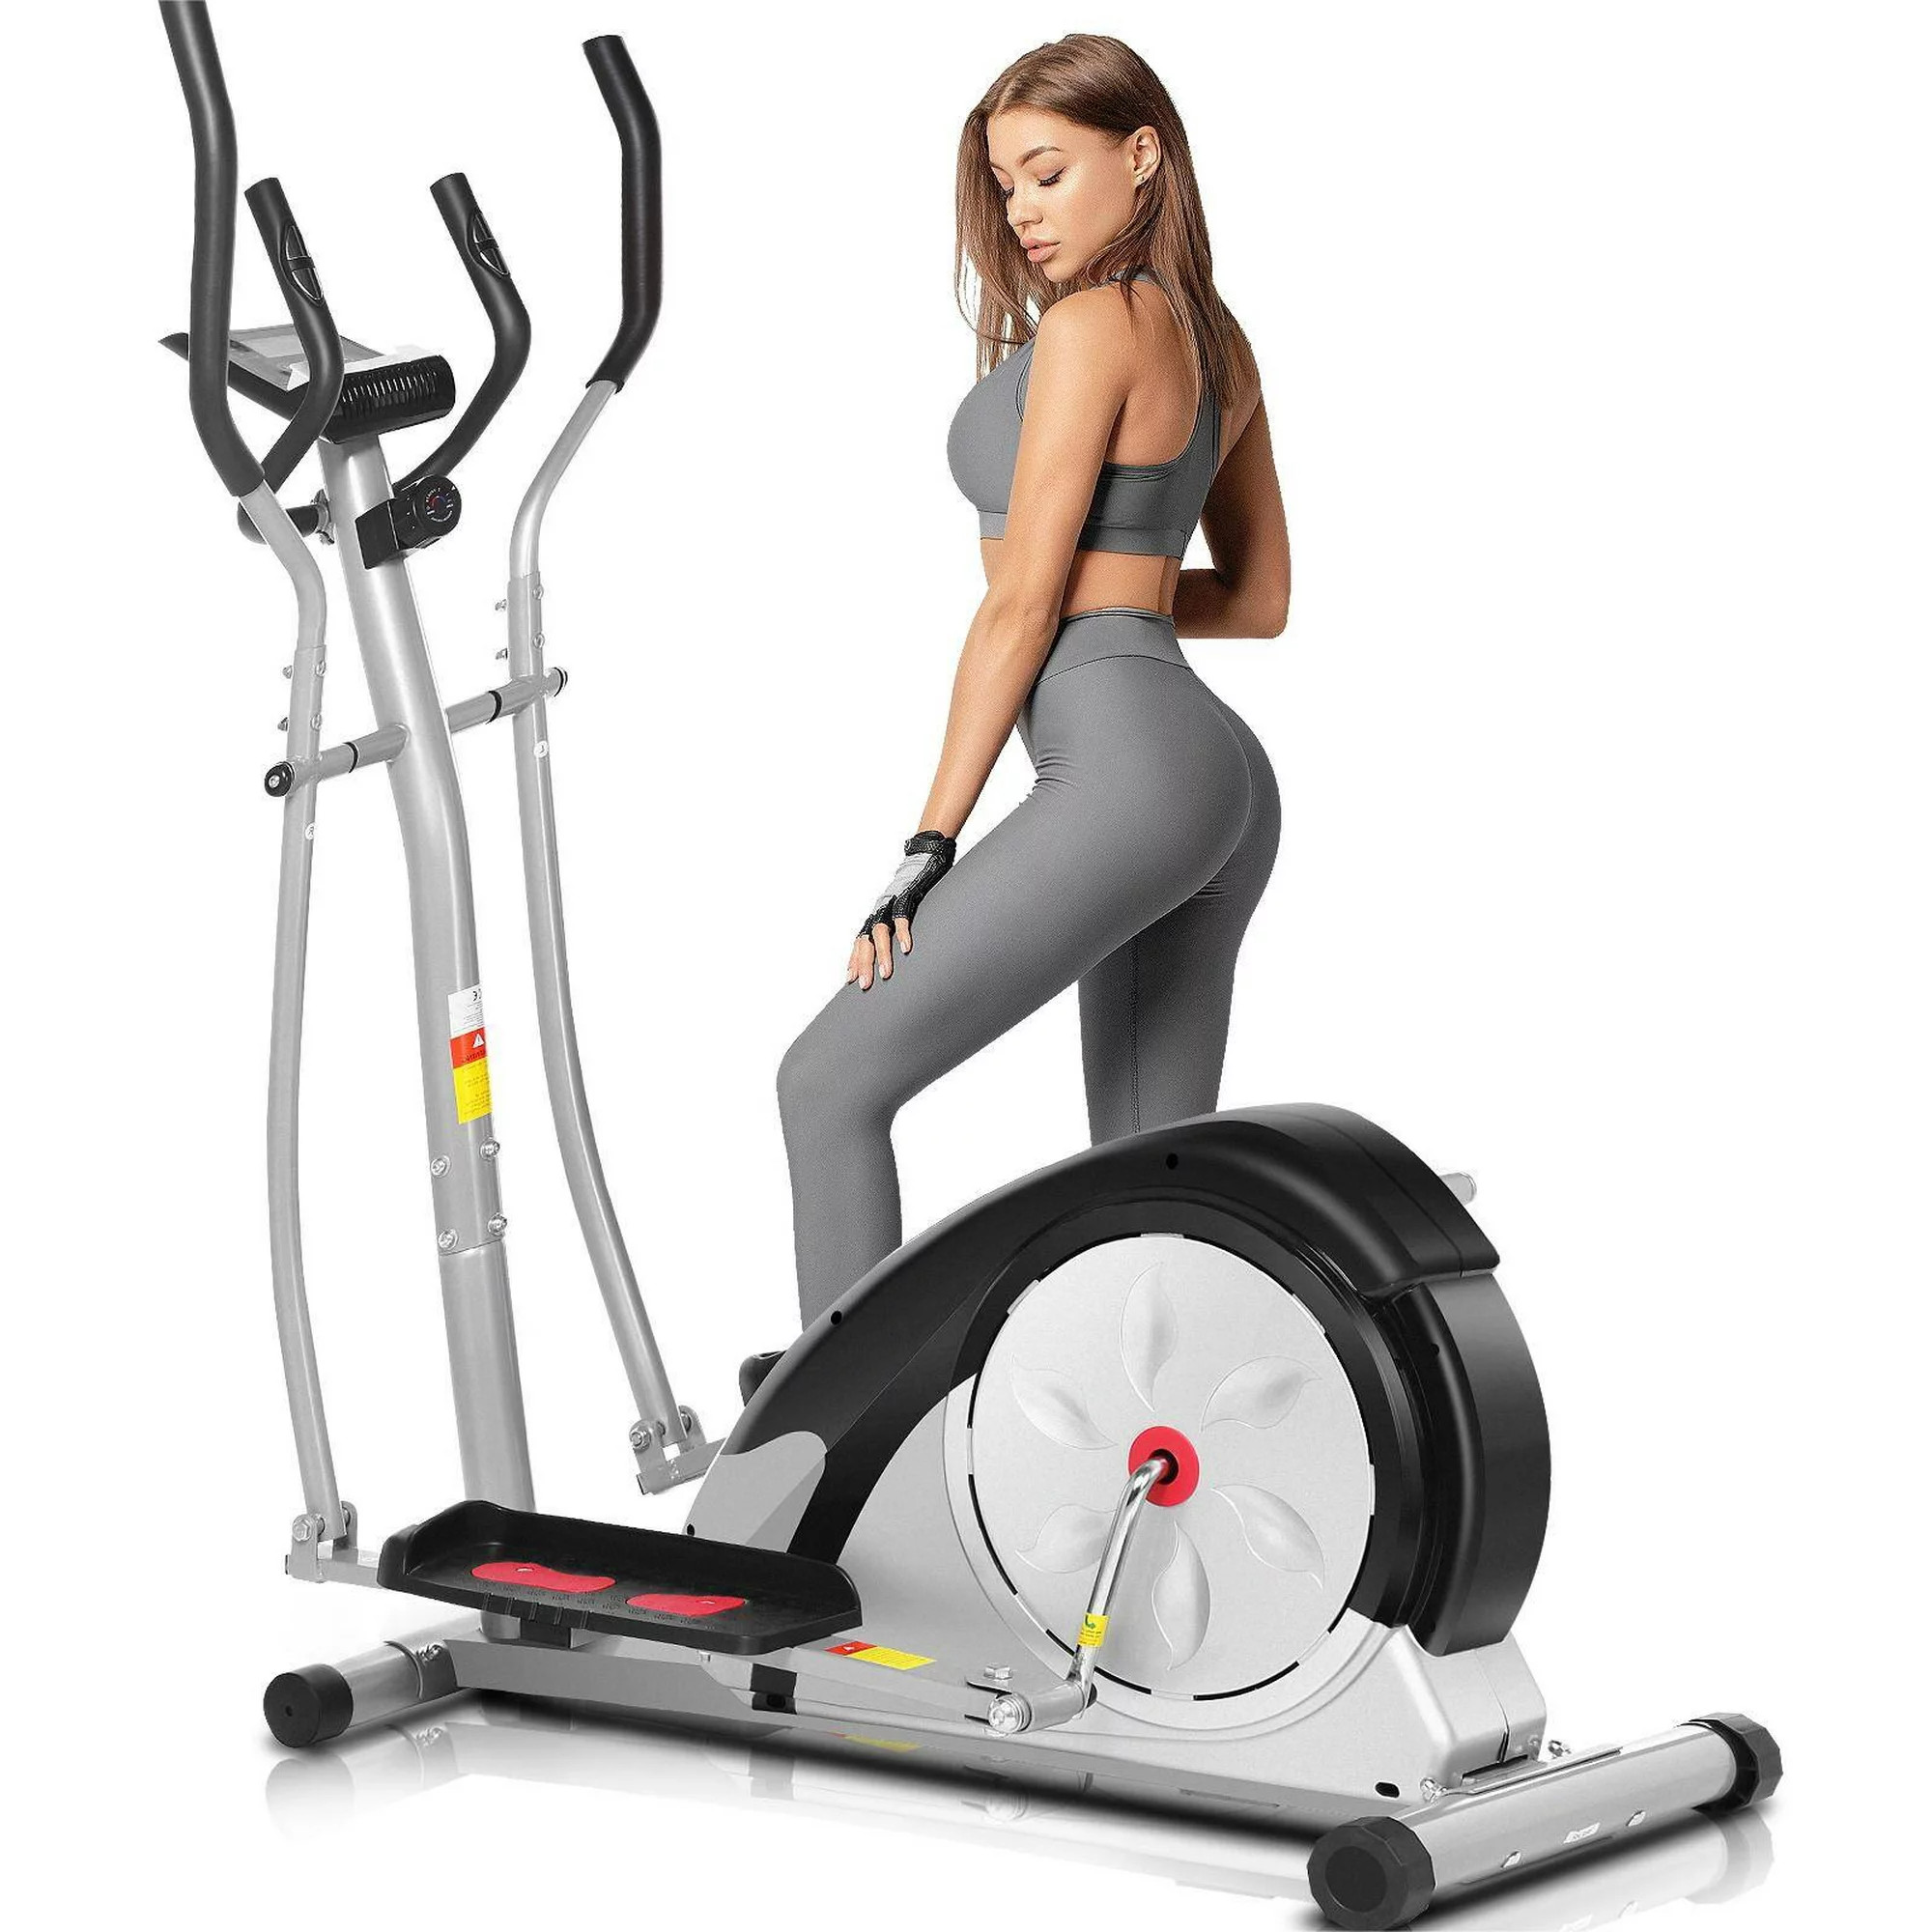 Vibespark Elliptical Trainer - 8-Level Magnetic Resistance, LCD Monitor, Heart Rate Sensor, 350 lbs Capacity (Silver)